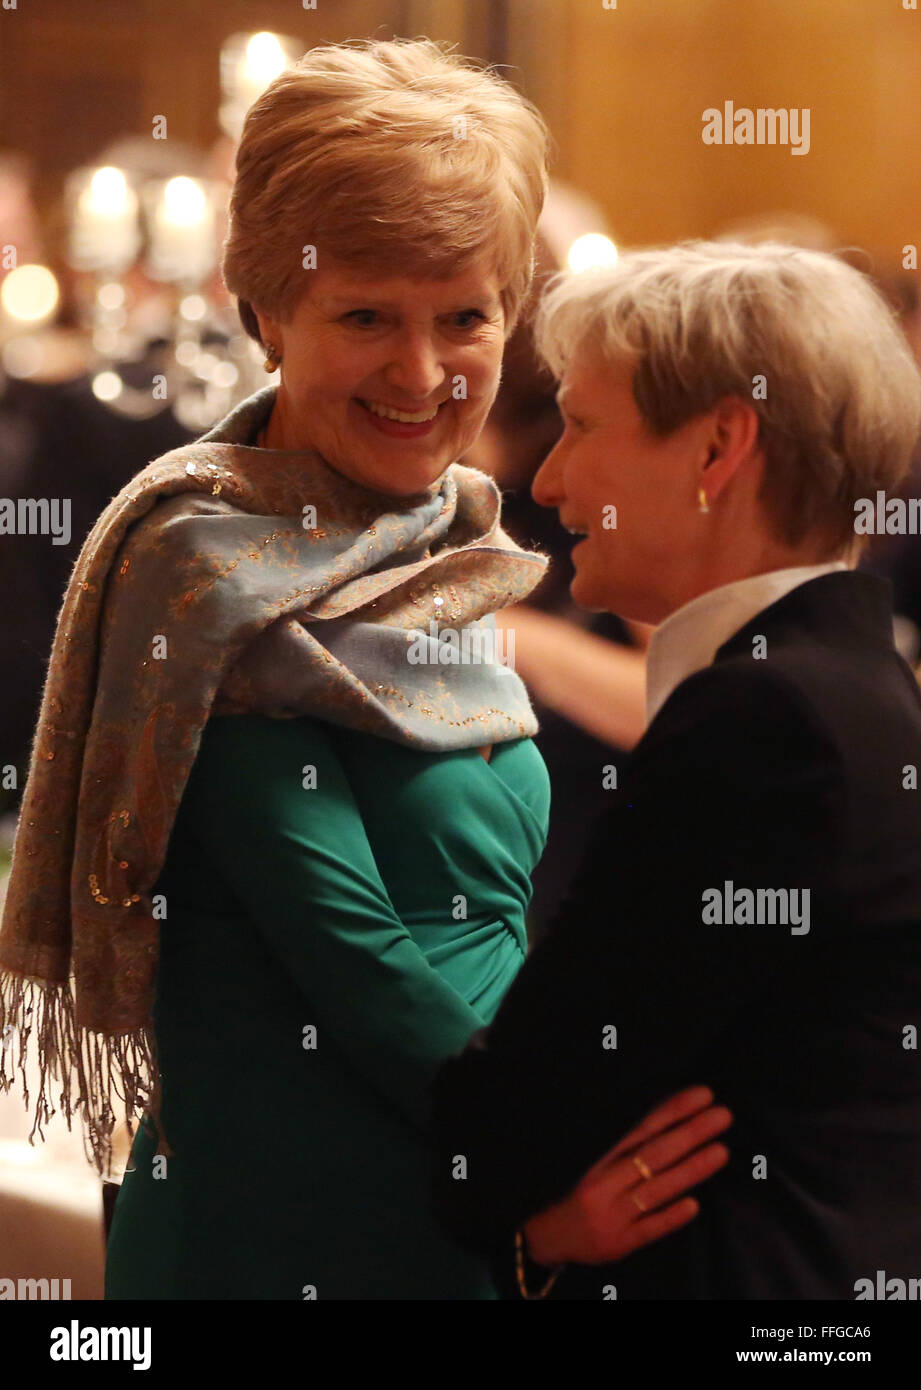 Hamburg, Germany. 12th Feb, 2016. Friede Springer (L), German publisher and widow of Axel Springer, speaks with Bishop of the Evangelical Lutheran Church in Northern Germany, Kirsten Fehrs (R), as she arrives to the Matthiae dinner at the city hall of Hamburg, Germany, 12 February 2016. Britain's Prime Minister David Cameron and German Chancellor Angela Merkel are guests of honour at the oldest feast in the world. Since 1356, the leaders of the Hansa city invite distinguished guests to the Matthiae dinner. Photo: CHRISTIAN CHARISIUS/dpa/Alamy Live News Stock Photo